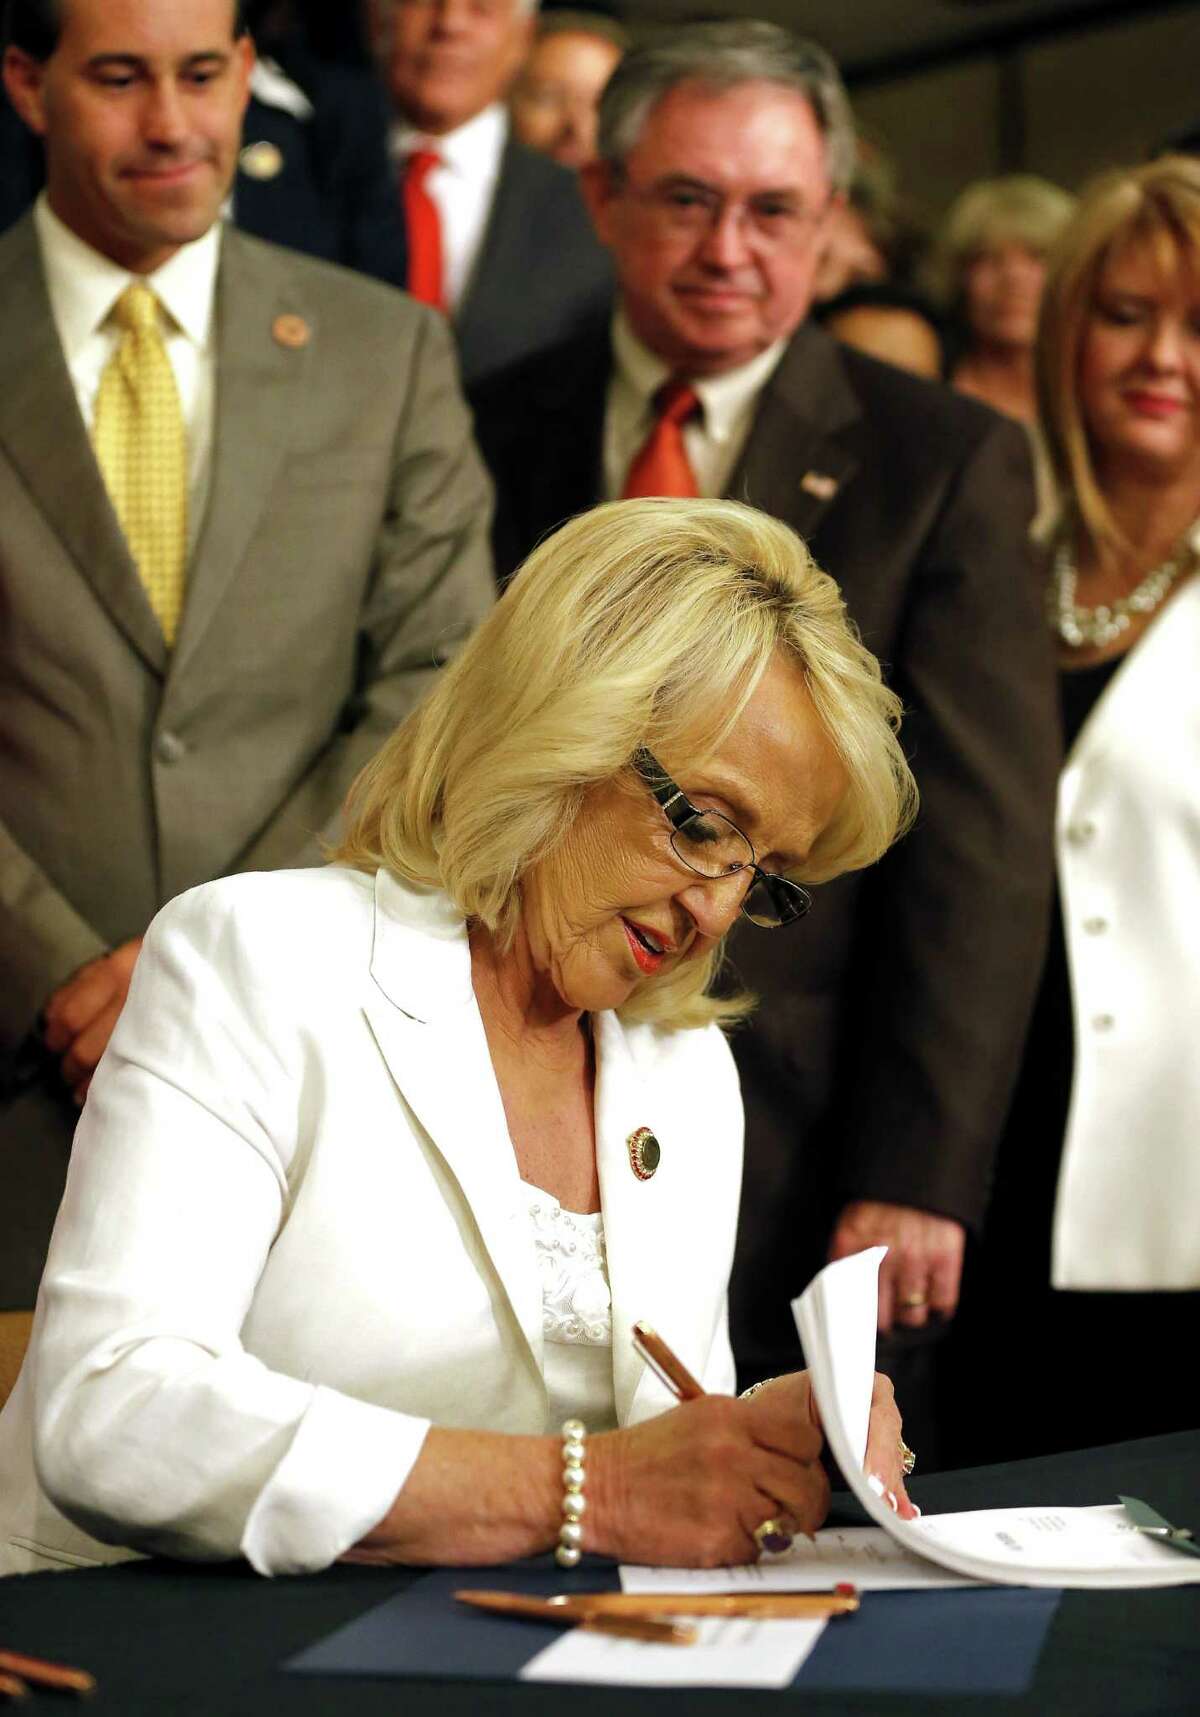 Arizona Republican Gov. Jan Brewer signs the Medicaid expansion law June 17 in a victory over conservatives in her own party opposed to President Obama's health care overhaul.